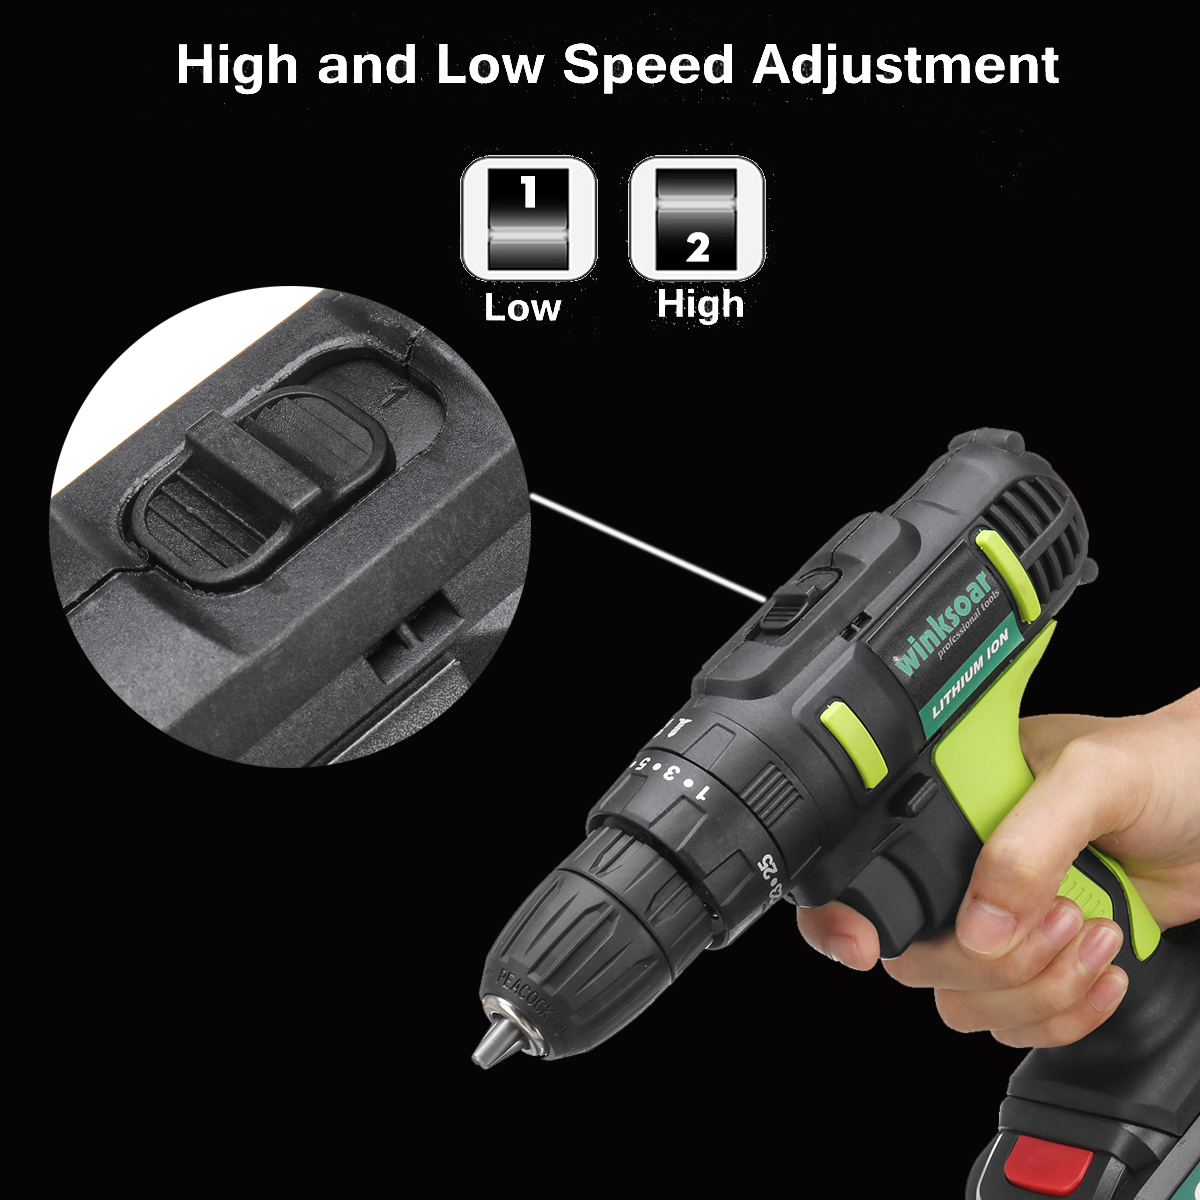 48VF-3-in-1-251-Gears-Electric-Impact-Drill-2-Speeds-Rechargeable-Screwdriver-W-LED-Light-1733392-7